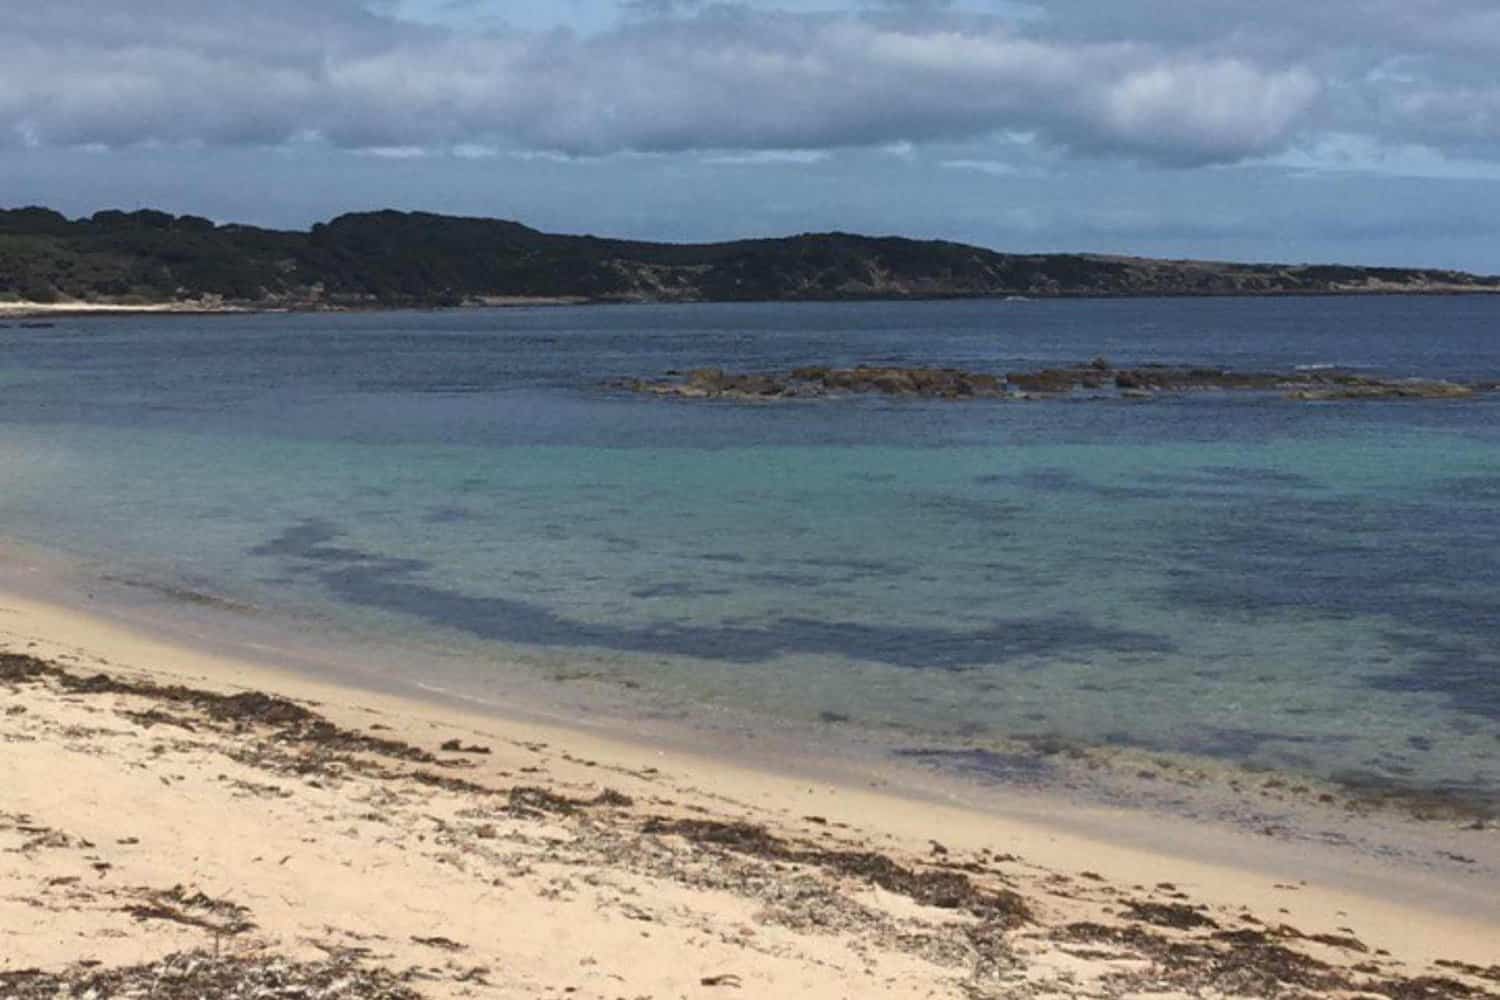 Gentle turquoise waters meet the sandy shore with scattered seaweed, overlooking a peaceful cove near Margaret River, perfect for a dog-friendly beach day.